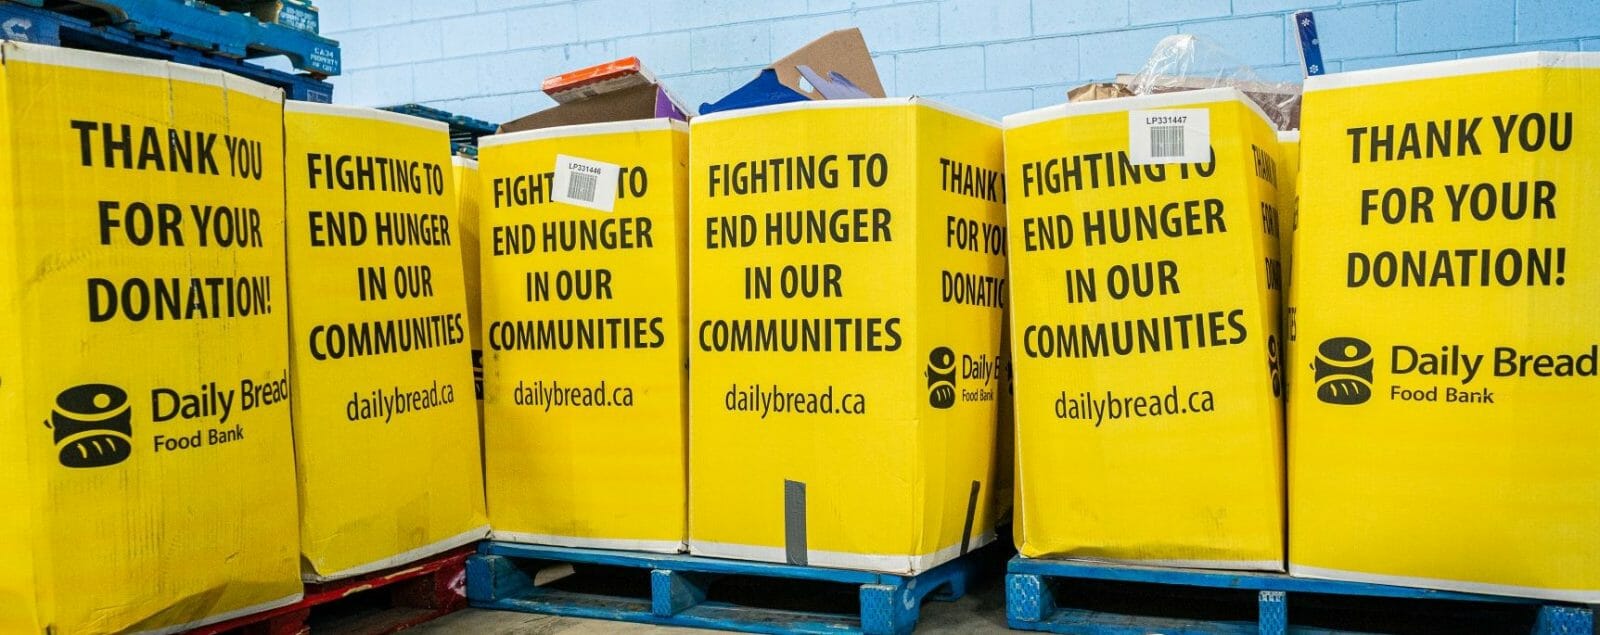 Image of Daily Bread Food Bank Donation Bins